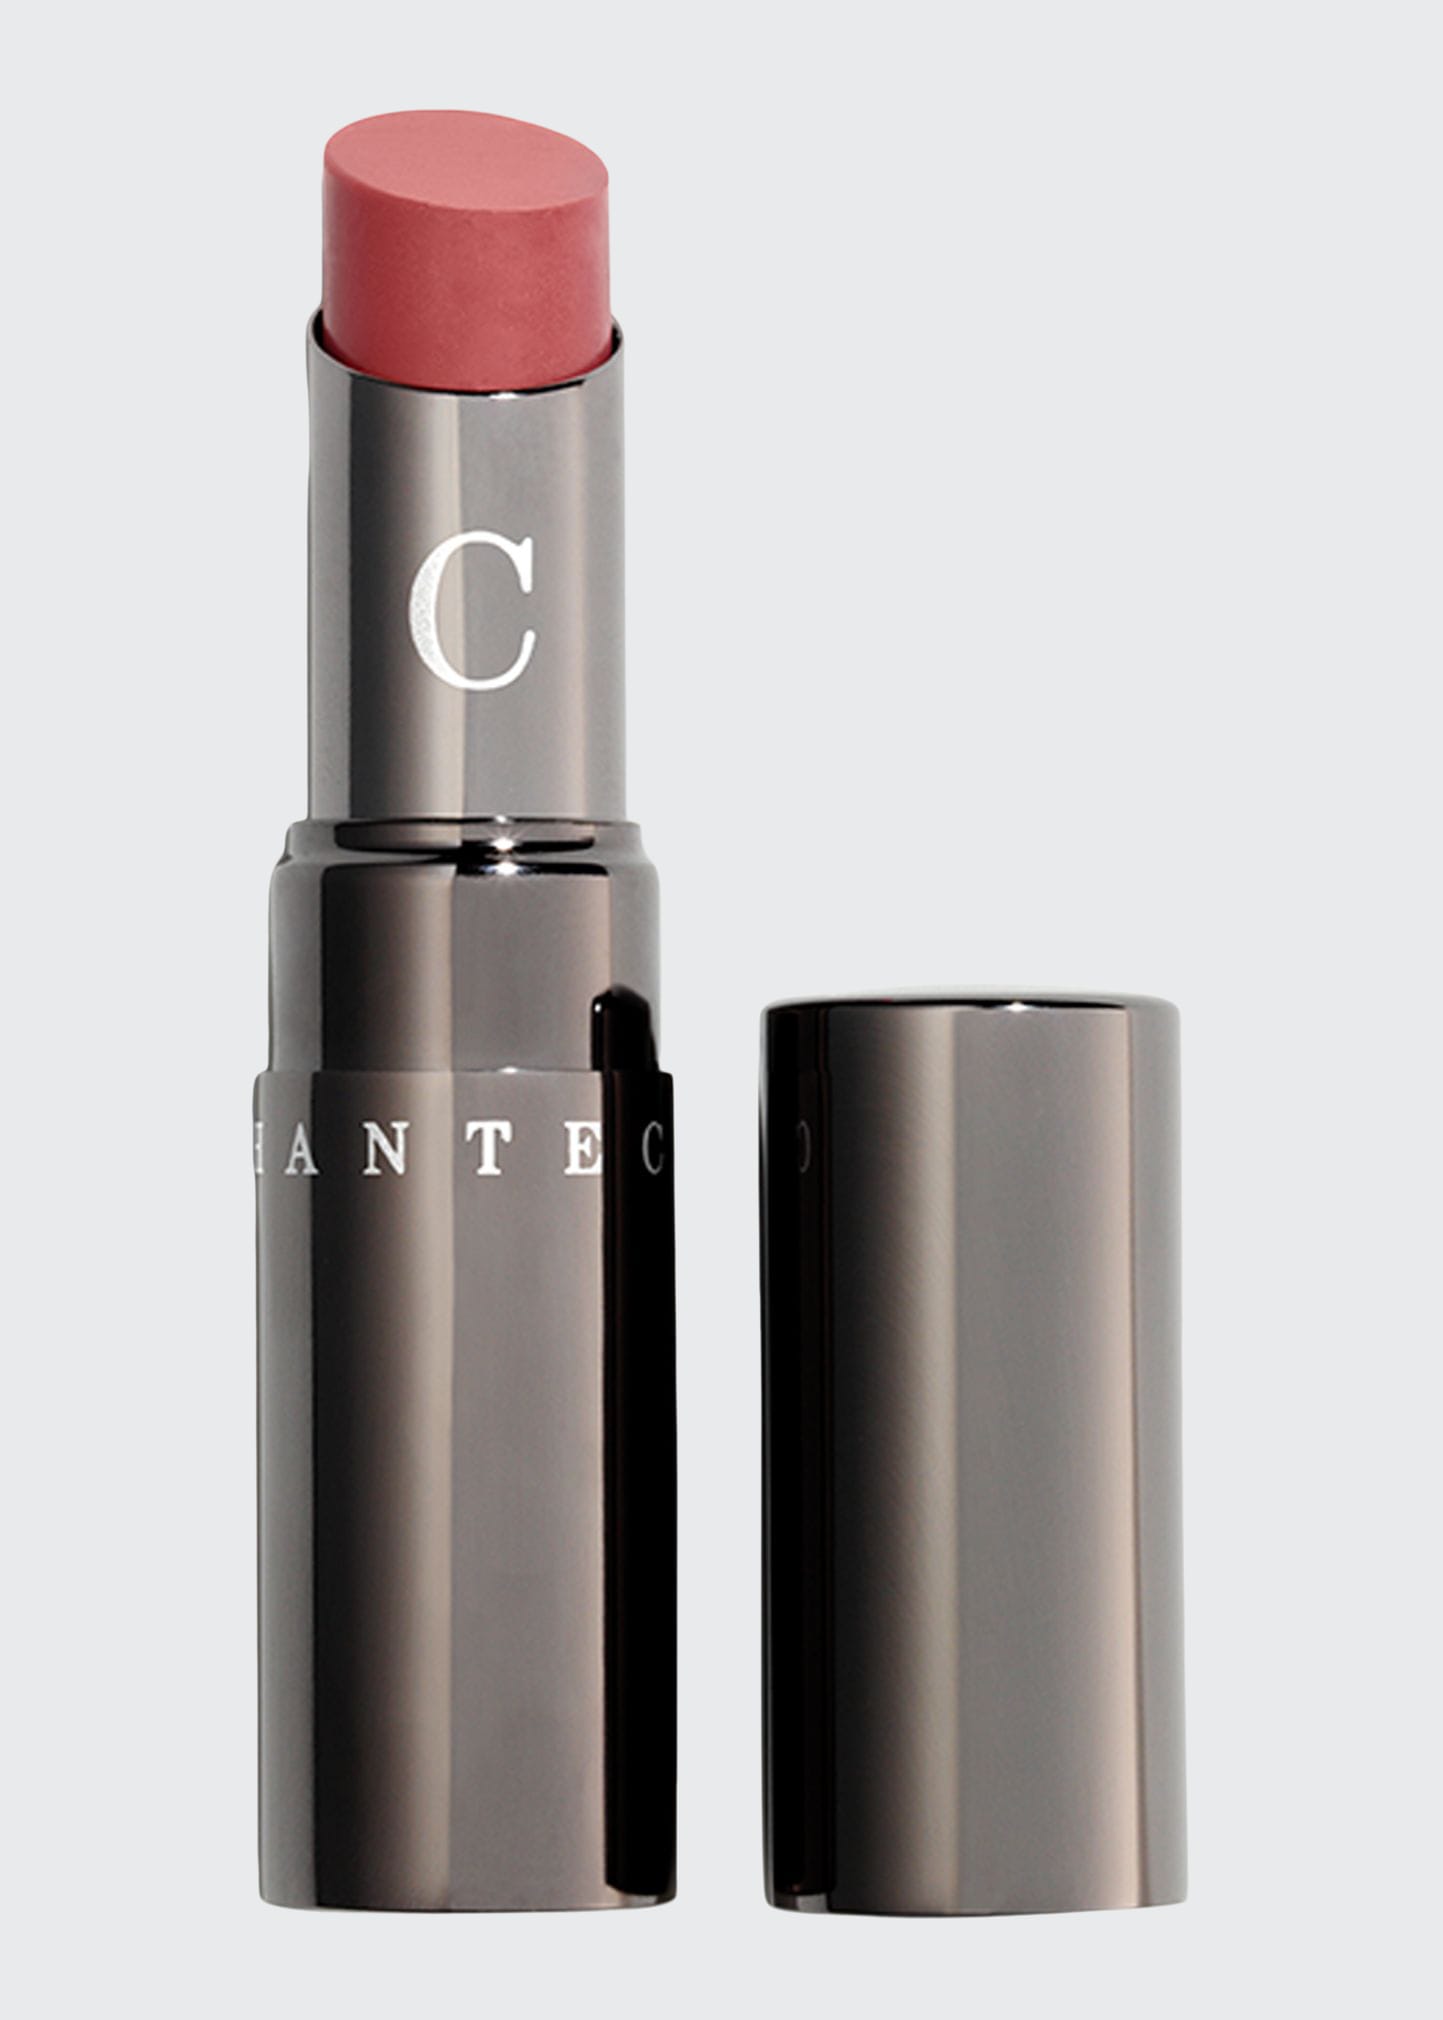 Chantecaille Lip Chic Lipstick In Amour